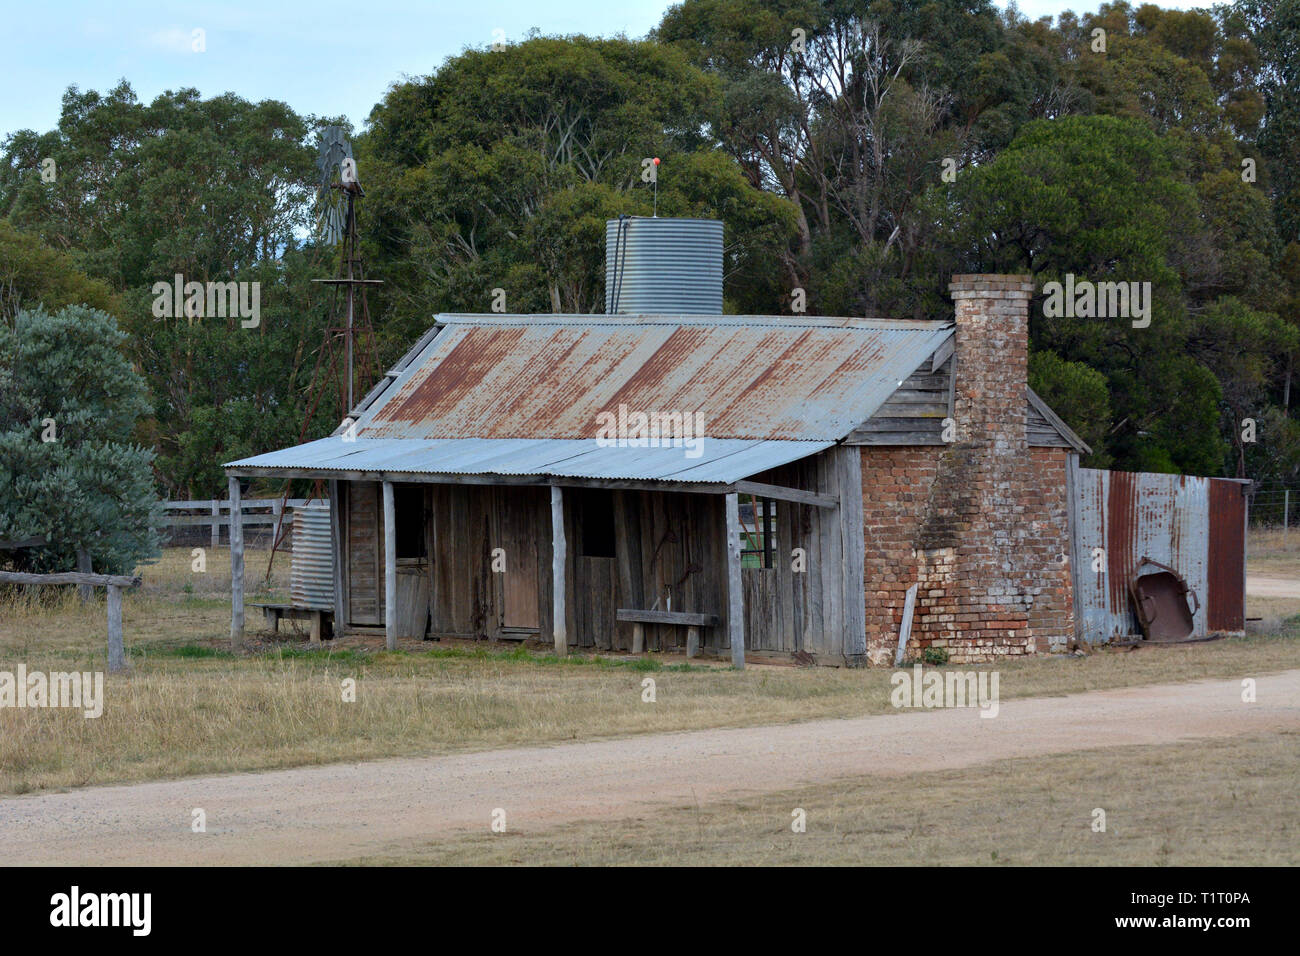 An old deserted Australian farm house in the outback of Canberra, Australia Photo - Alamy